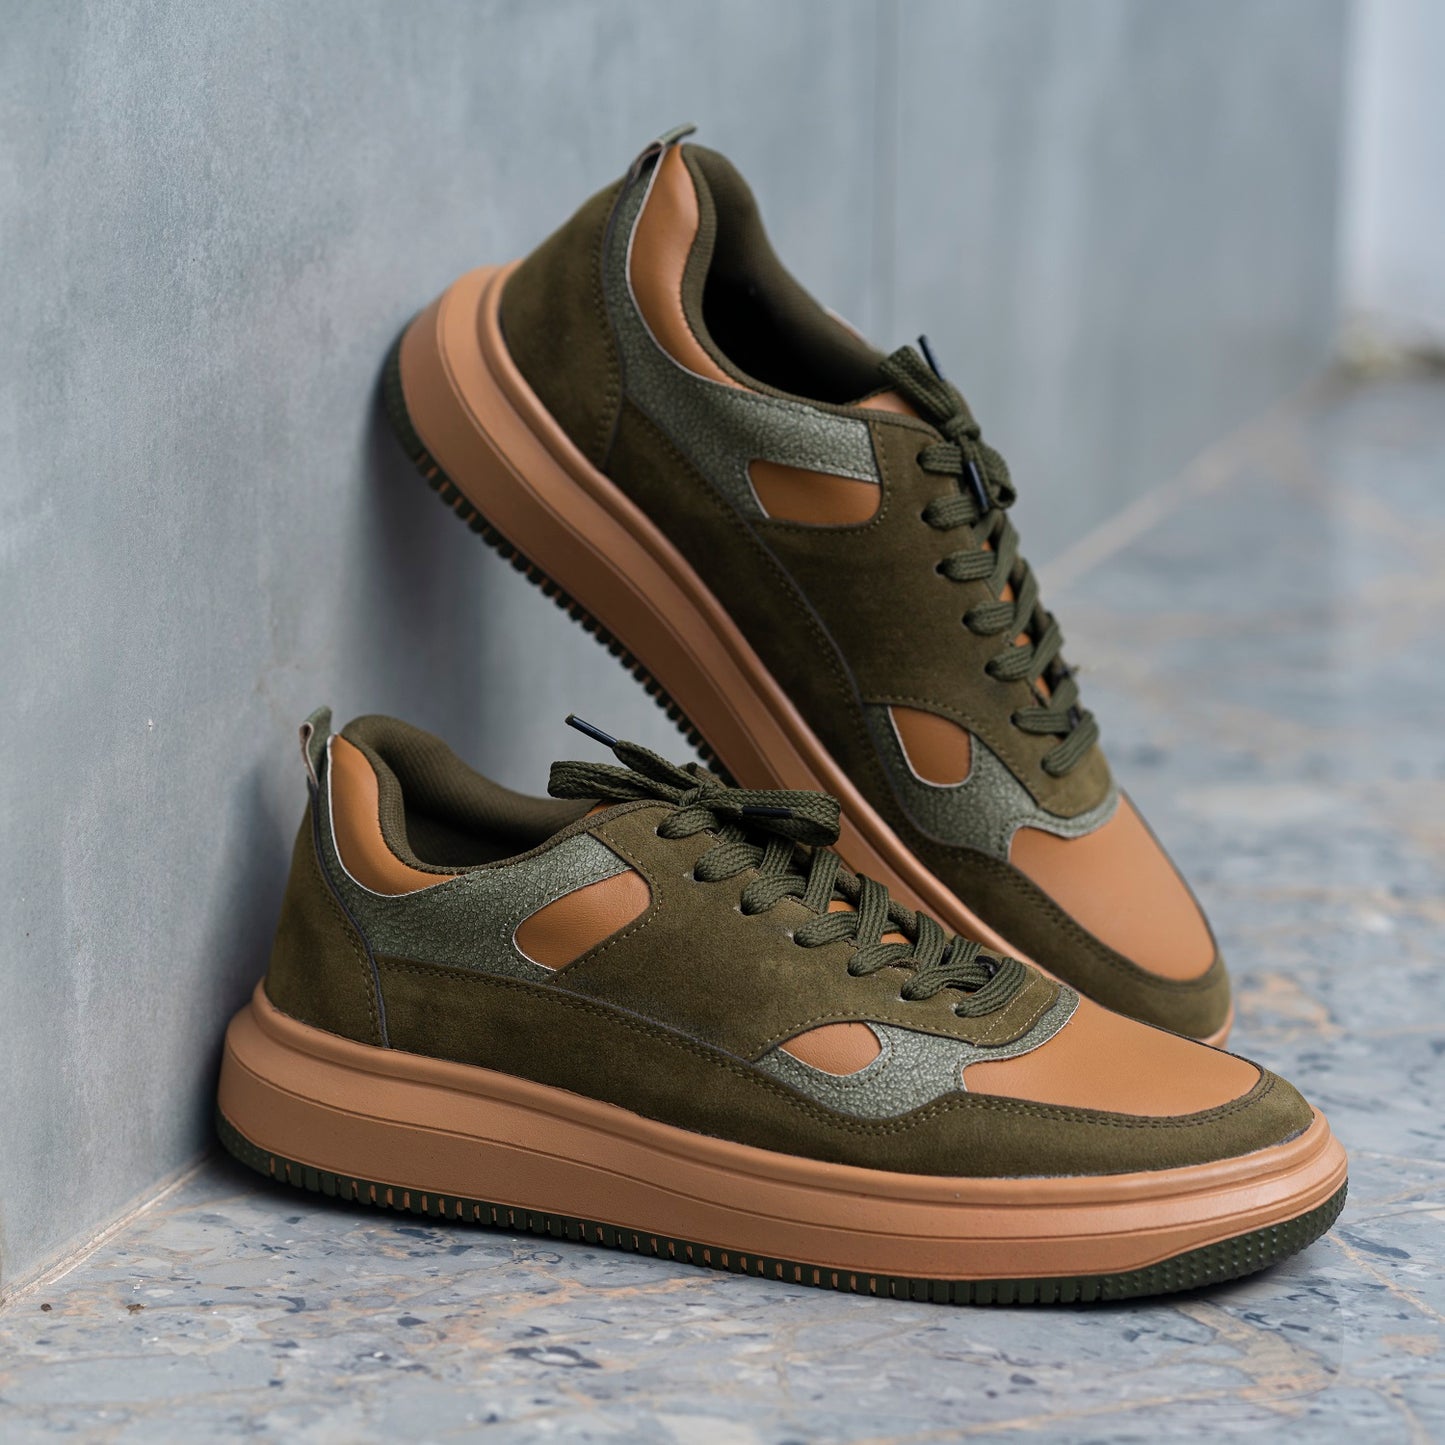 The Aurous Owen Laceup Sneakers